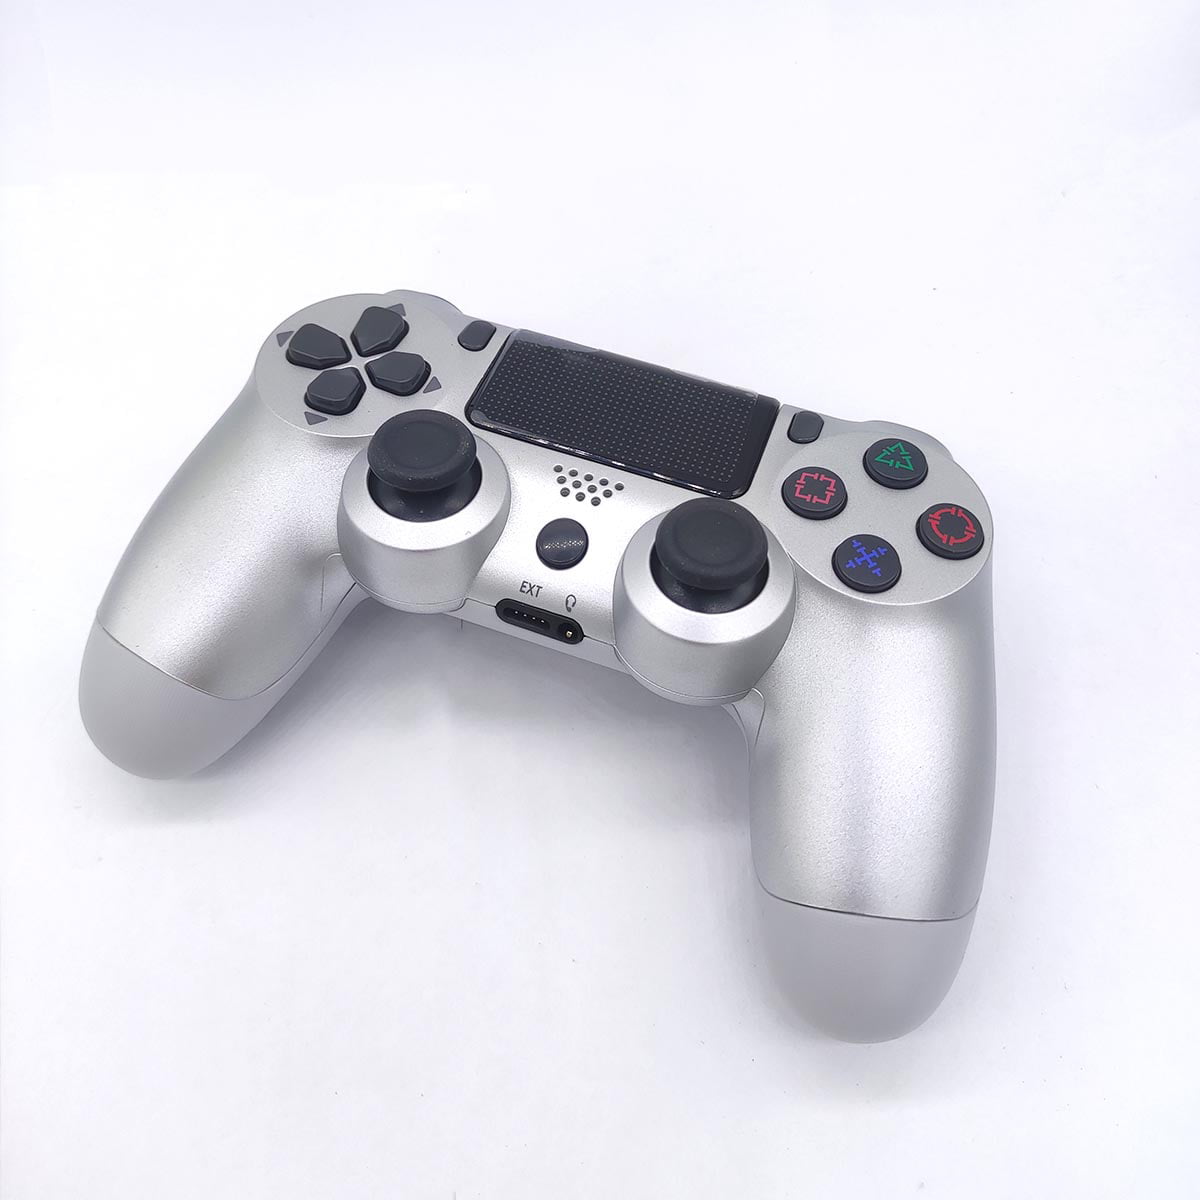 PS4 Controller Wired Gaming Joystick Playstation 4 Wired Controller Remote for Playstation 4 PS4 Slim Cable Length 6.5ft PS4 Pro 